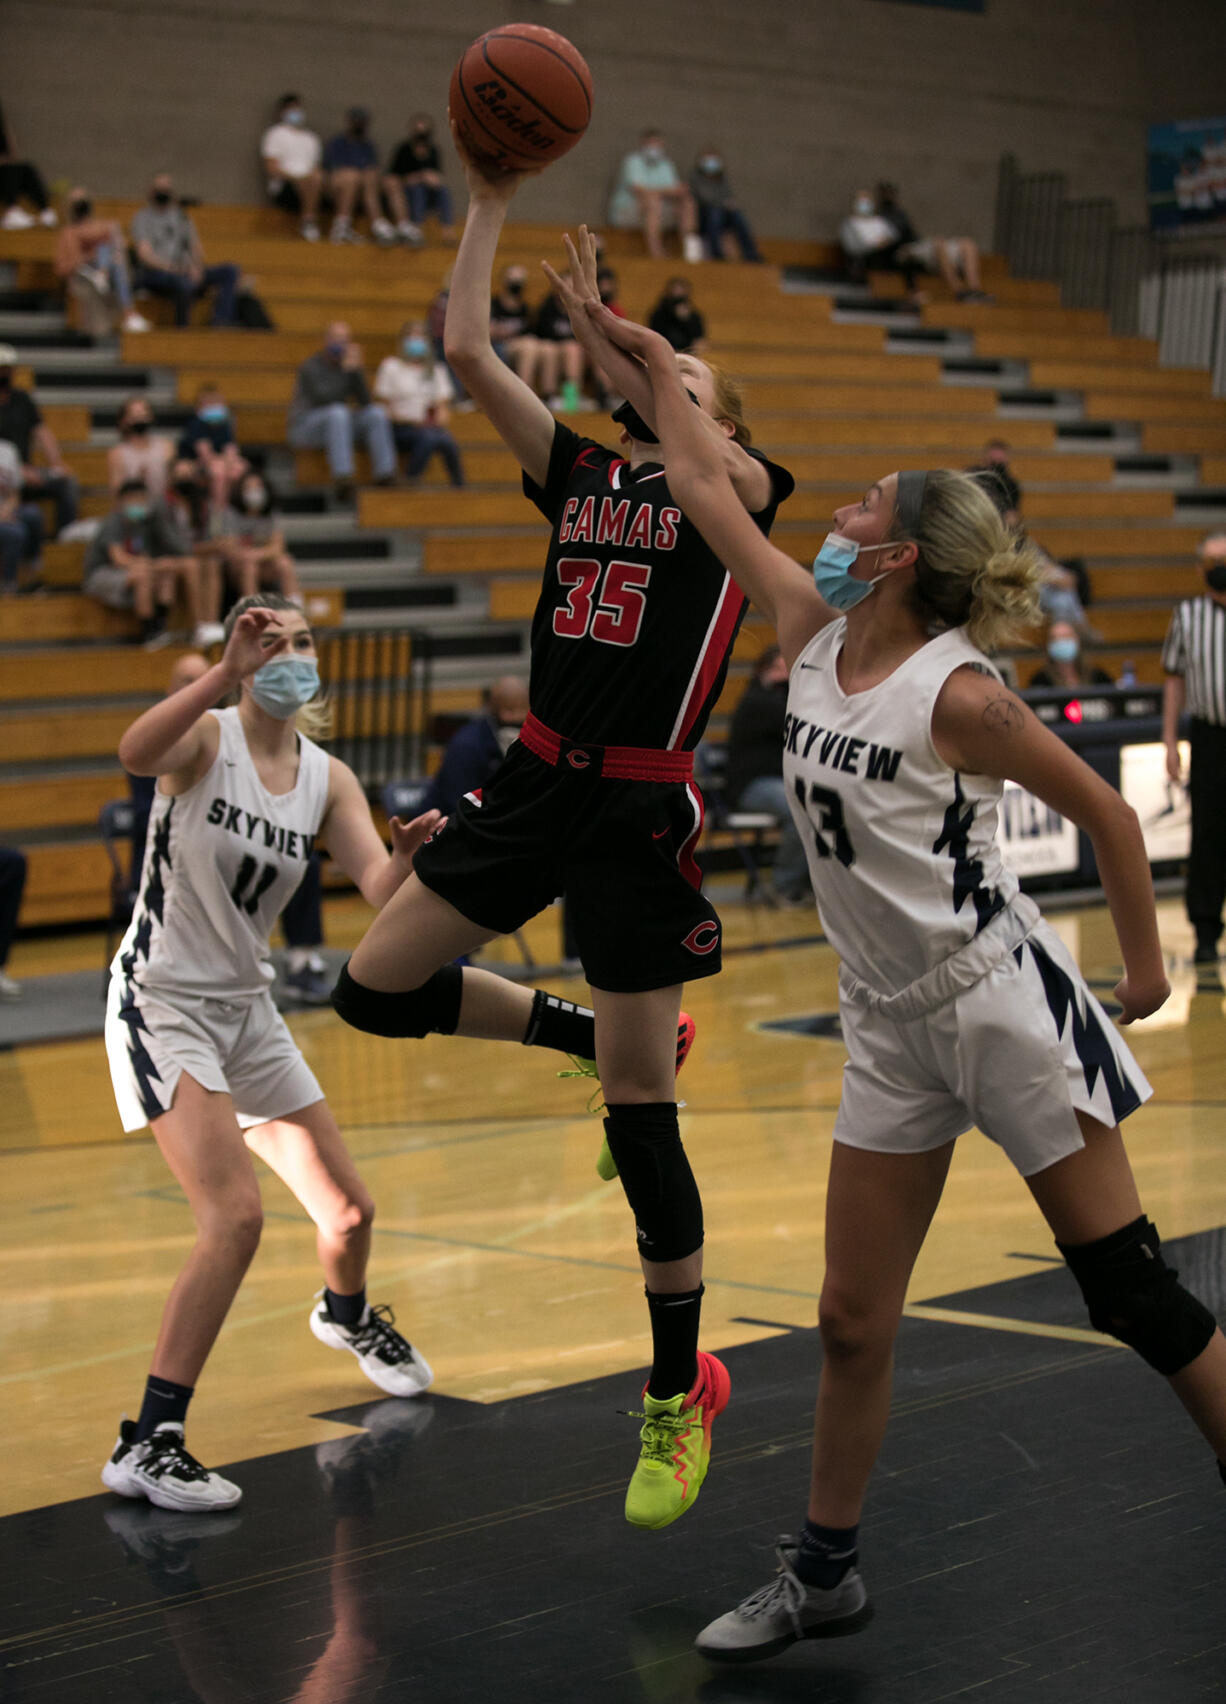 Camas' Addison Harris (35) attempts a lay-up while being defended by Skyview 's Avery Wilson (11) and Skylar Groesbeck (13) during the first half at Skyview High School on Thursday, April 29, 2021.